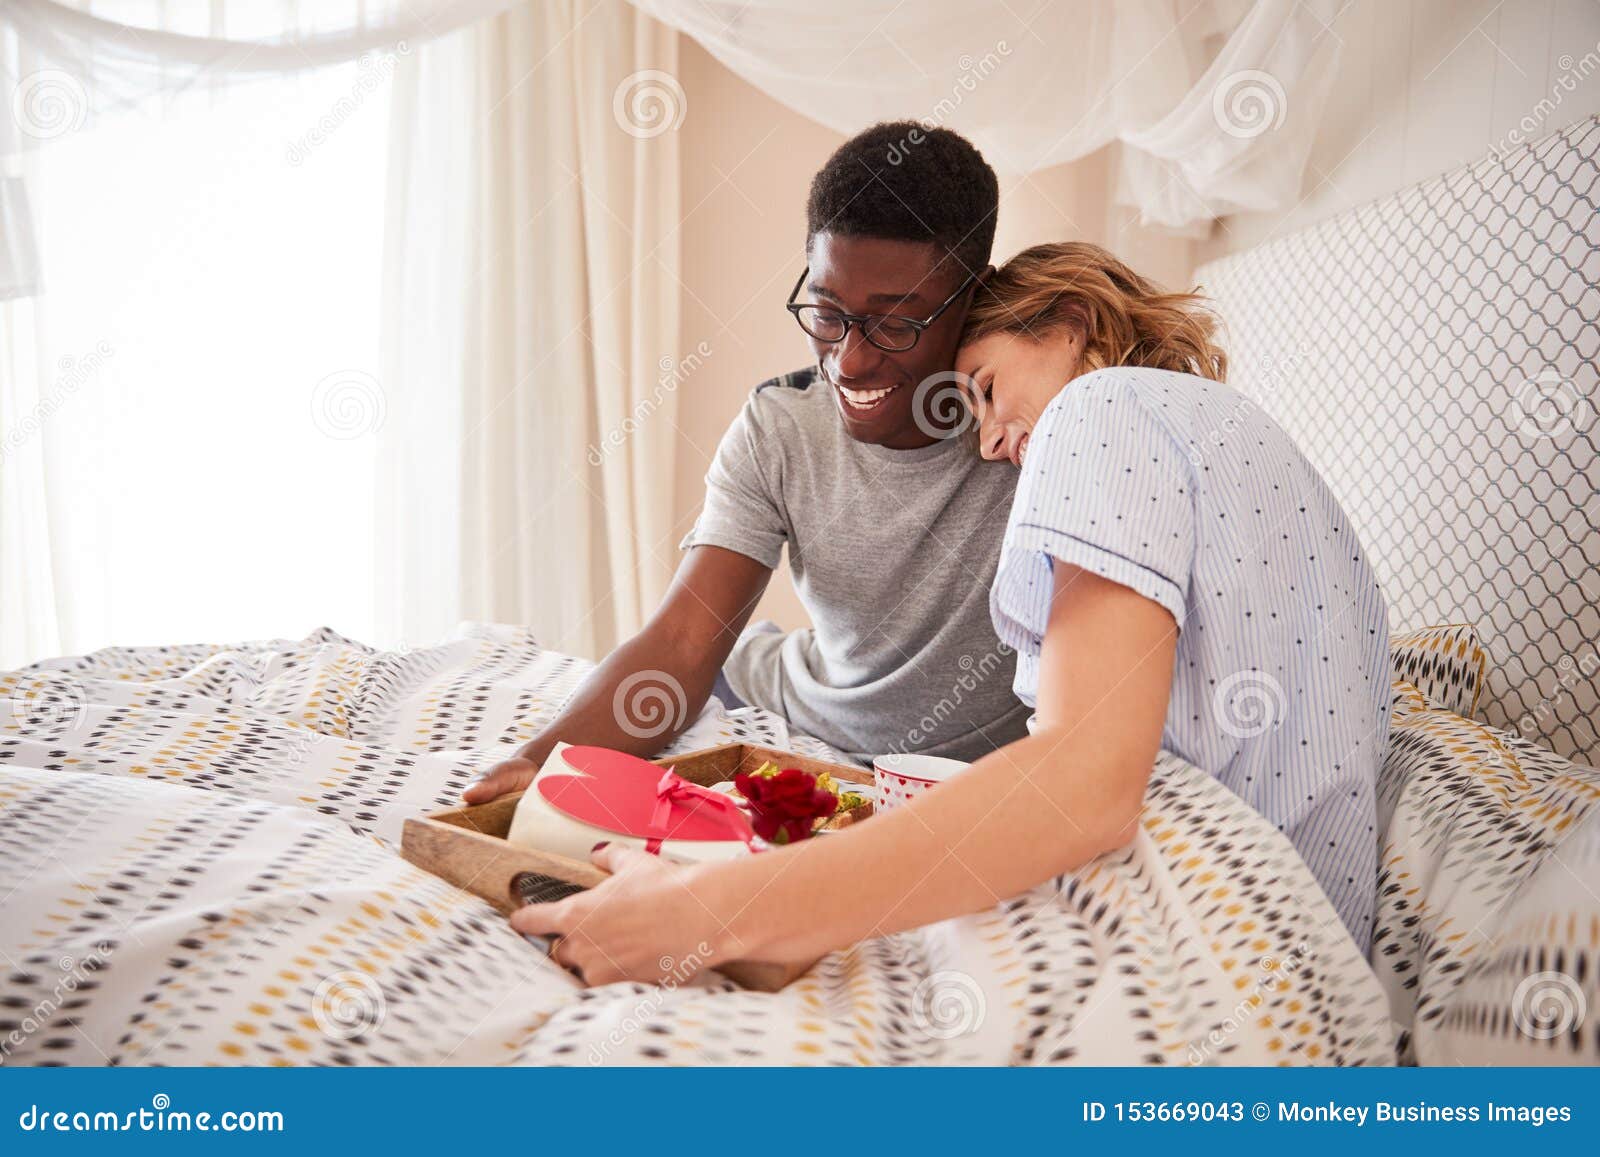 mixed race couple embracing, man bringing his partner breakfast and gifts in bed, close up